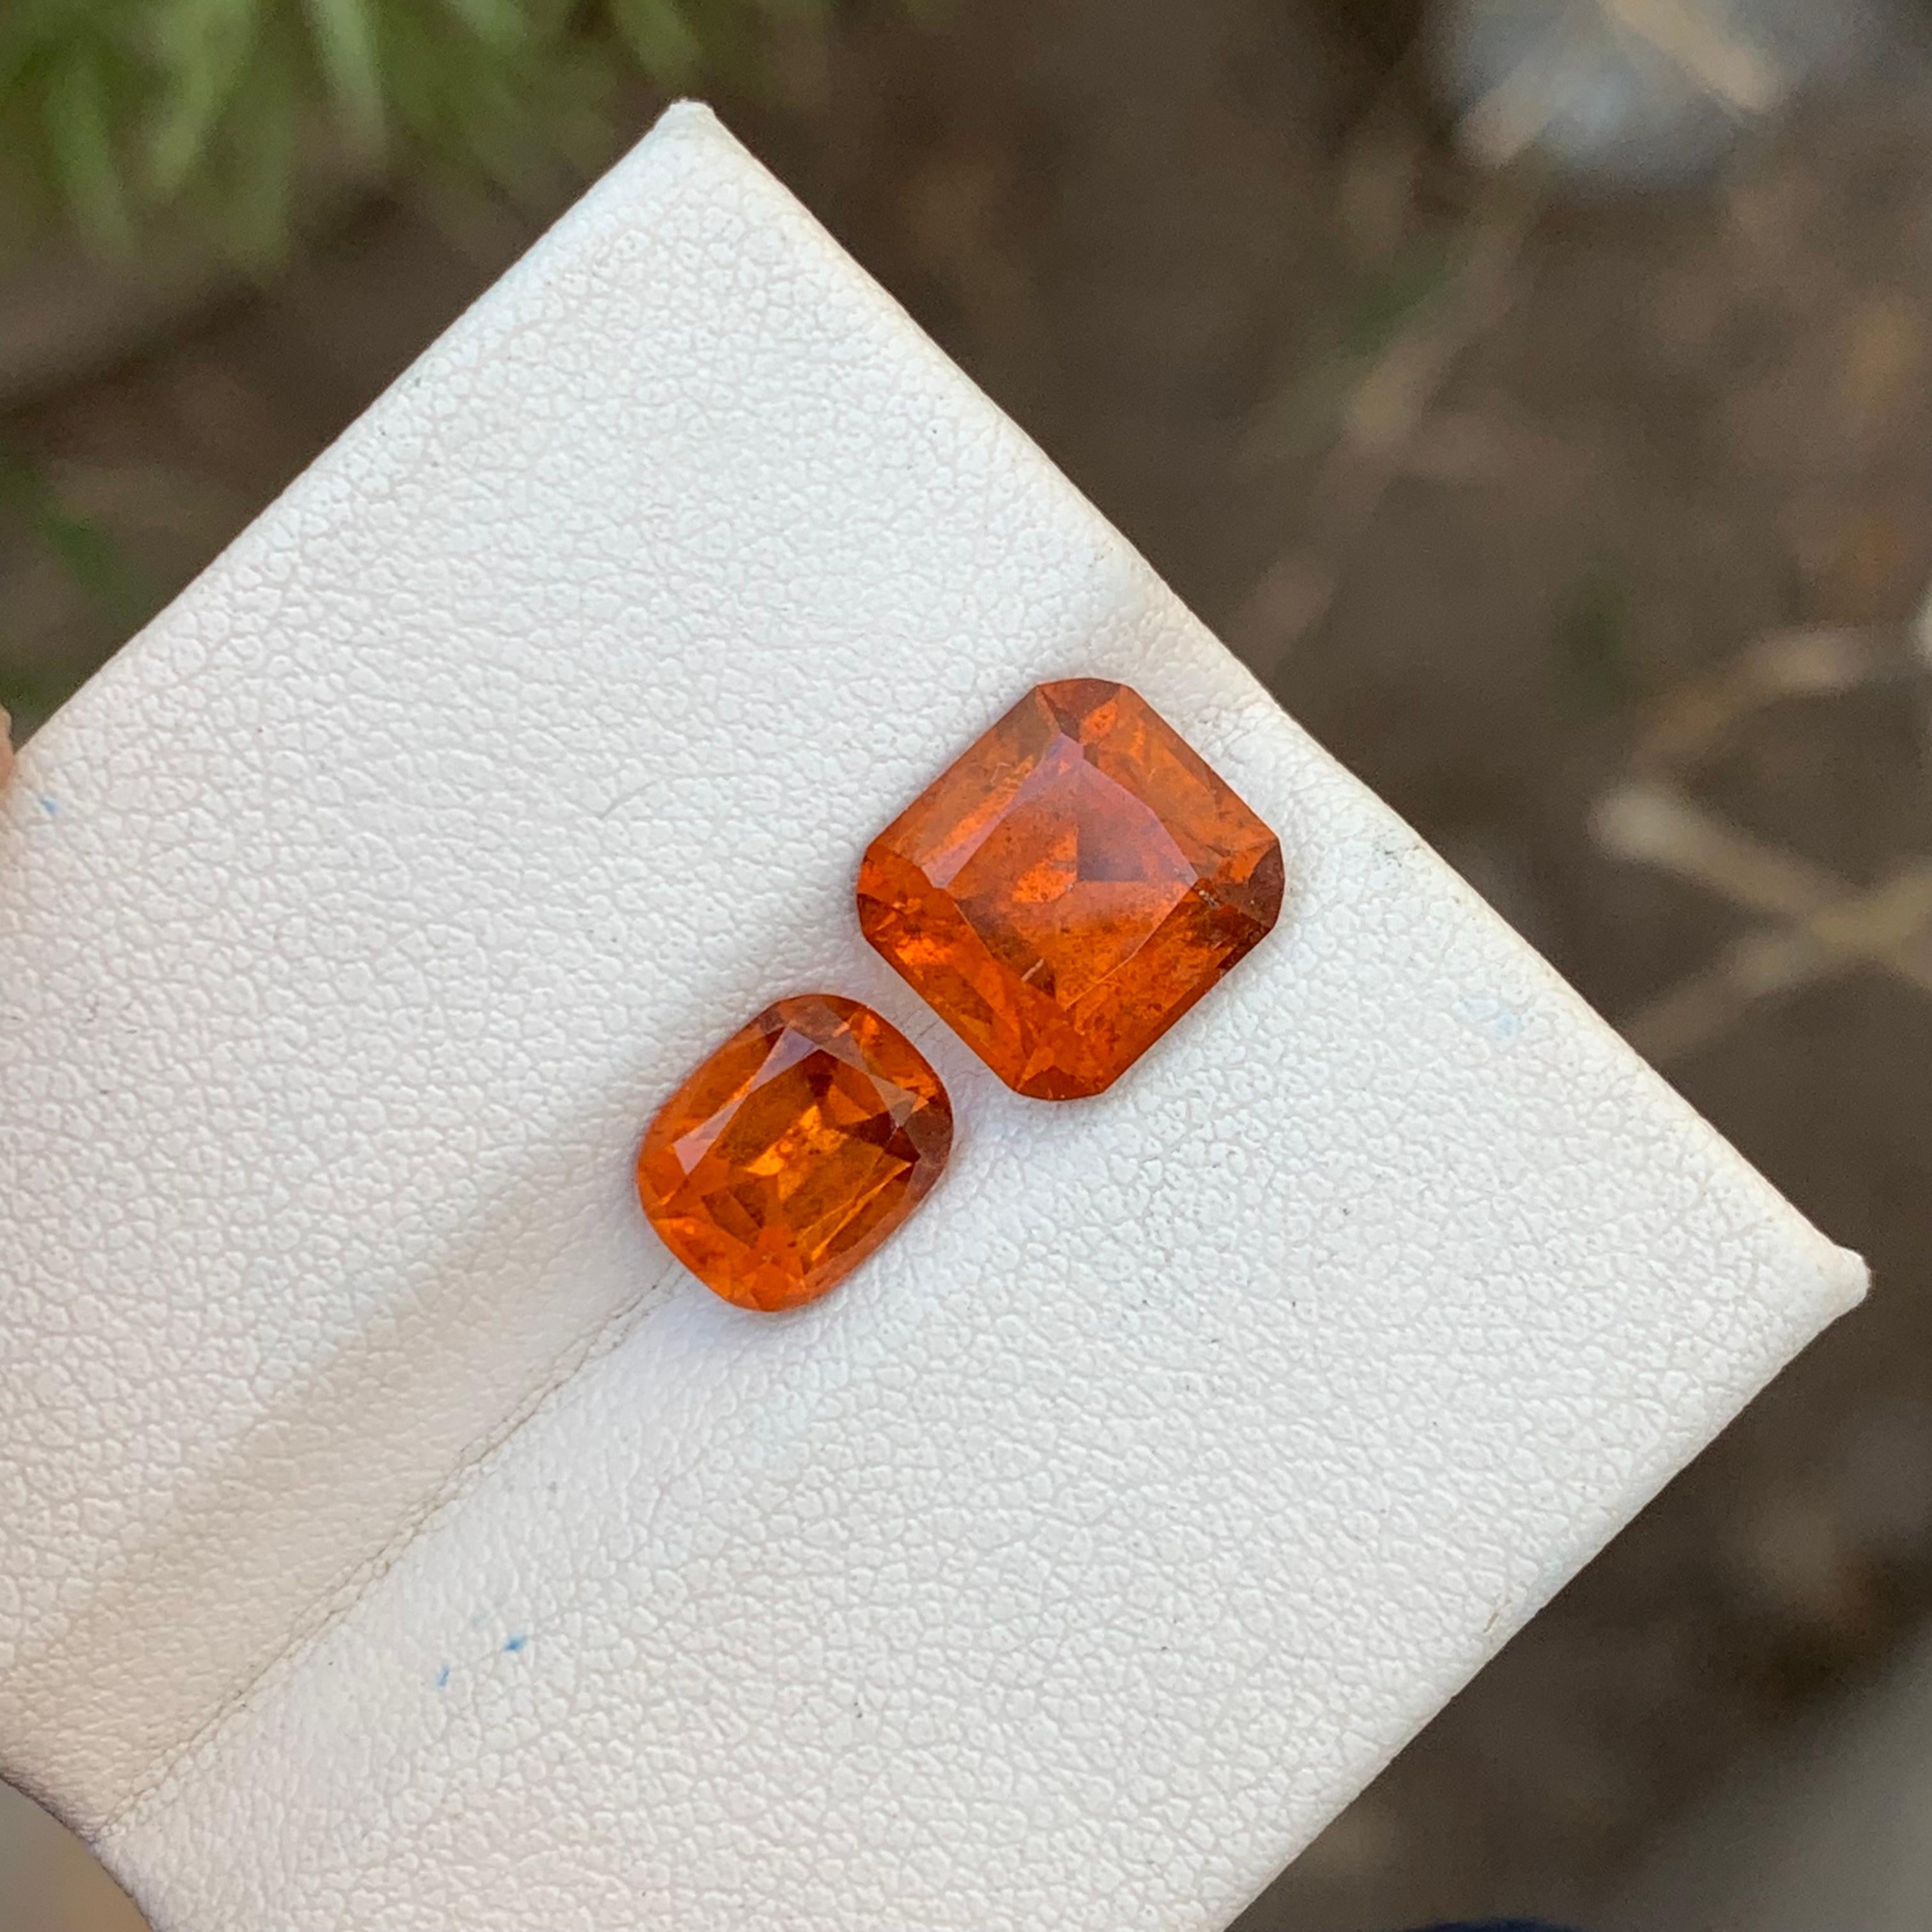 5.95 Carats Natural Loose Hessonite Garnet 2 Pieces For Ring Jewelry Making  en vente 1